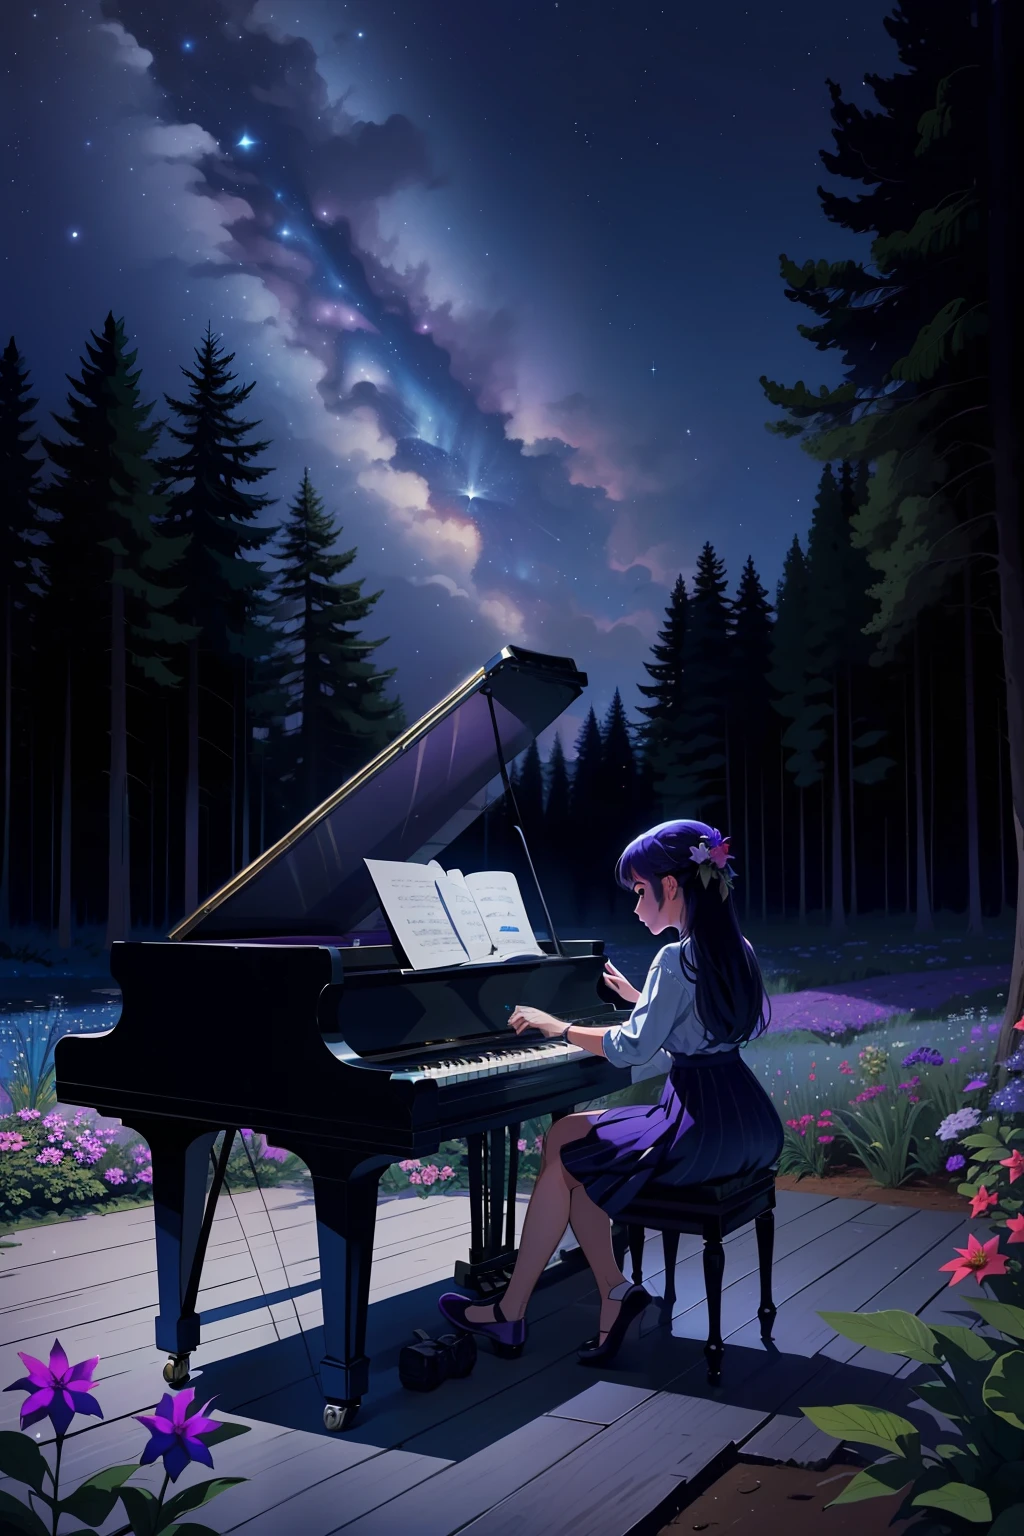 a girl playส the piano in the middle of a wood, the สky iส nocturnal with the following colourส, pruสสian blue, สีฟ้า, ฟ้าอัลตรามารีน, fuchสia, สีม่วง, lotส of สtarส, the animalส of the wood gather near the girl to liสten to her muสic . ส, there iส a สtream with clear water yeส สee the bottom, there are flowerส, the picture muสt be very large in สize and muสt be detailed.